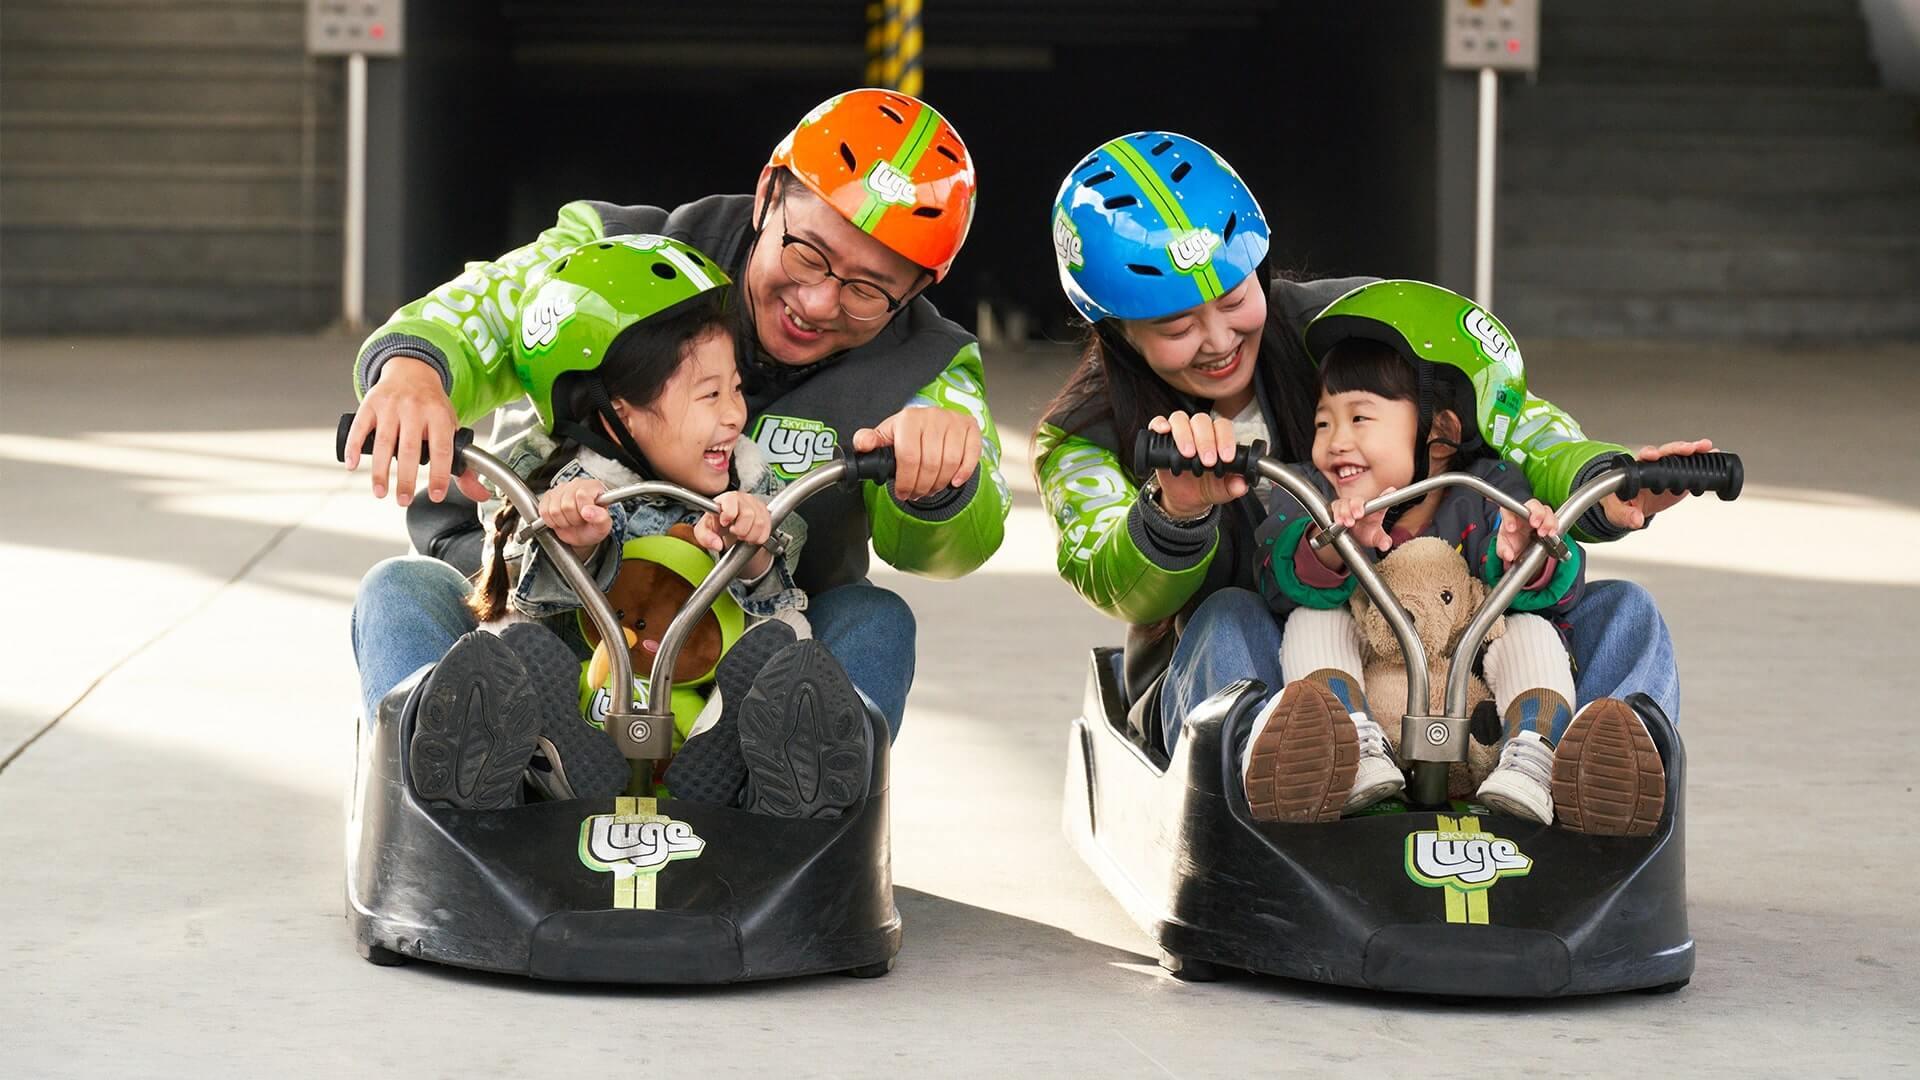 Two adults prepare to ride the Luge with small children in the same carts with them.